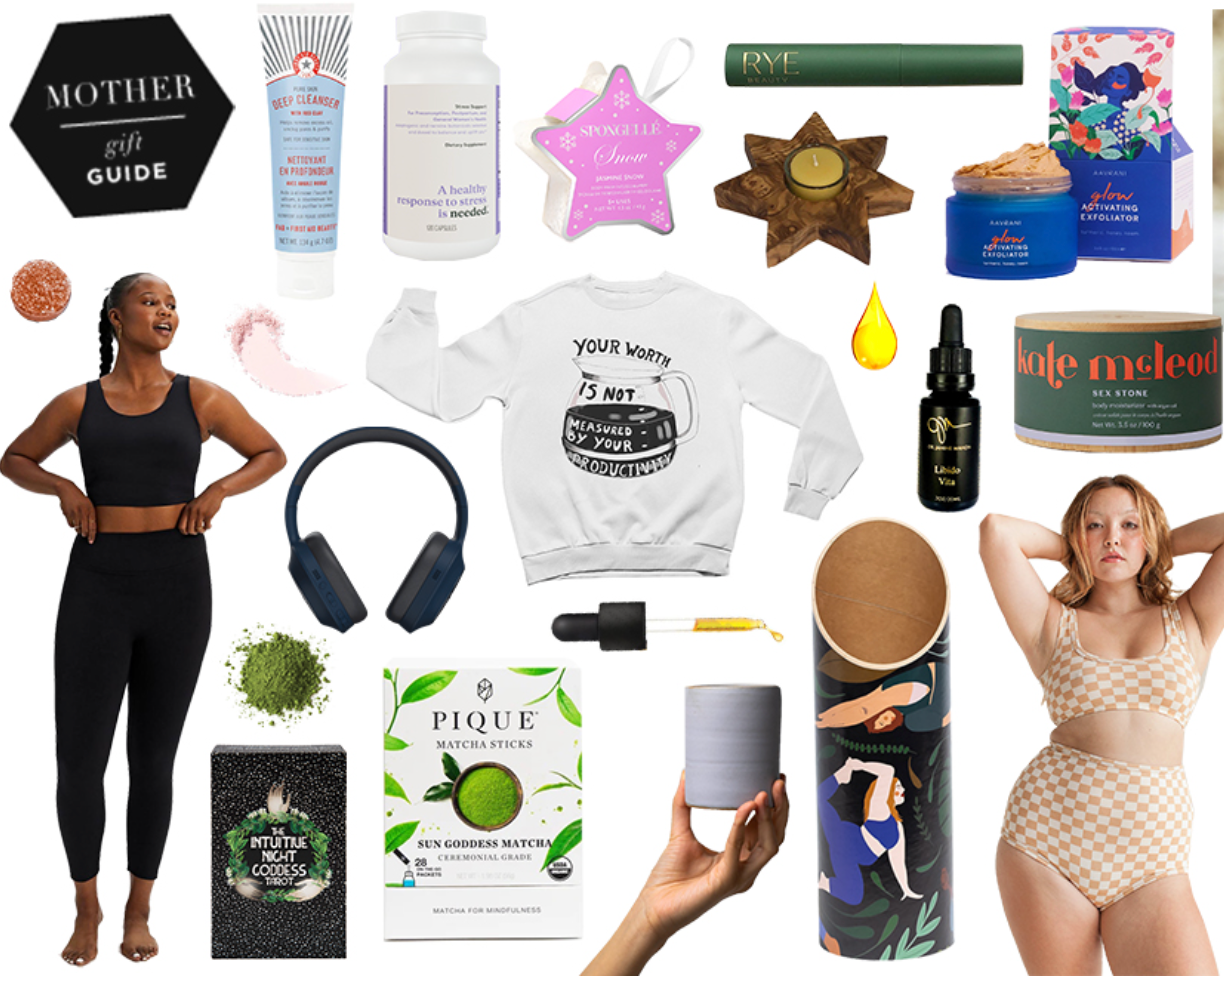 Mother: 60+ GIFTS FOR YOUR BEAUTY, WELLNESS, & SELF-CARE ROUTINE